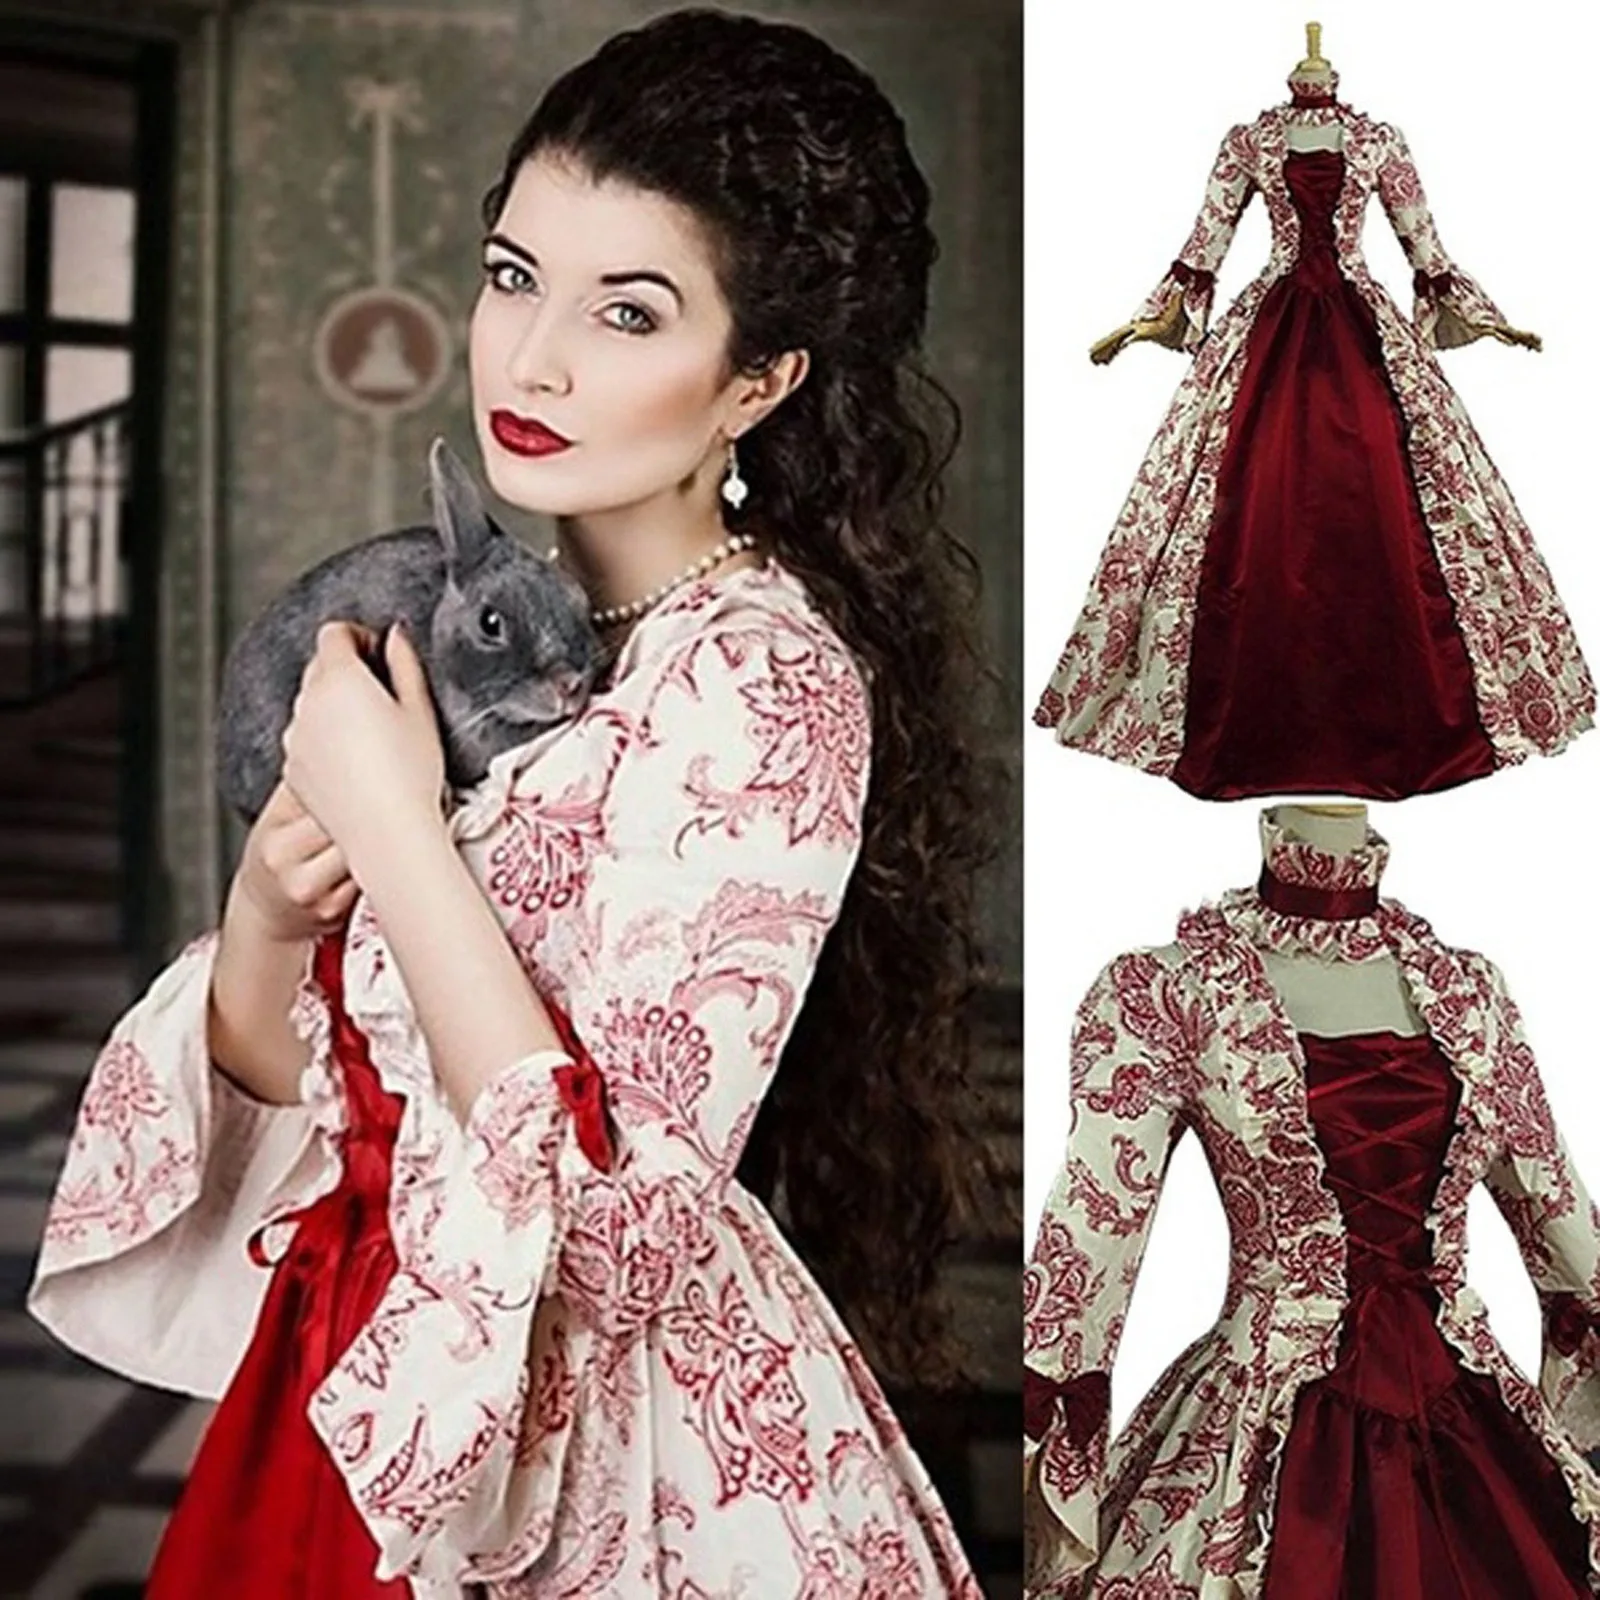 European Medieval Victoria Queen Princess Lolita Party Formal Dress Halloween Women Carnival Court Noble Palace Cosplay Costume